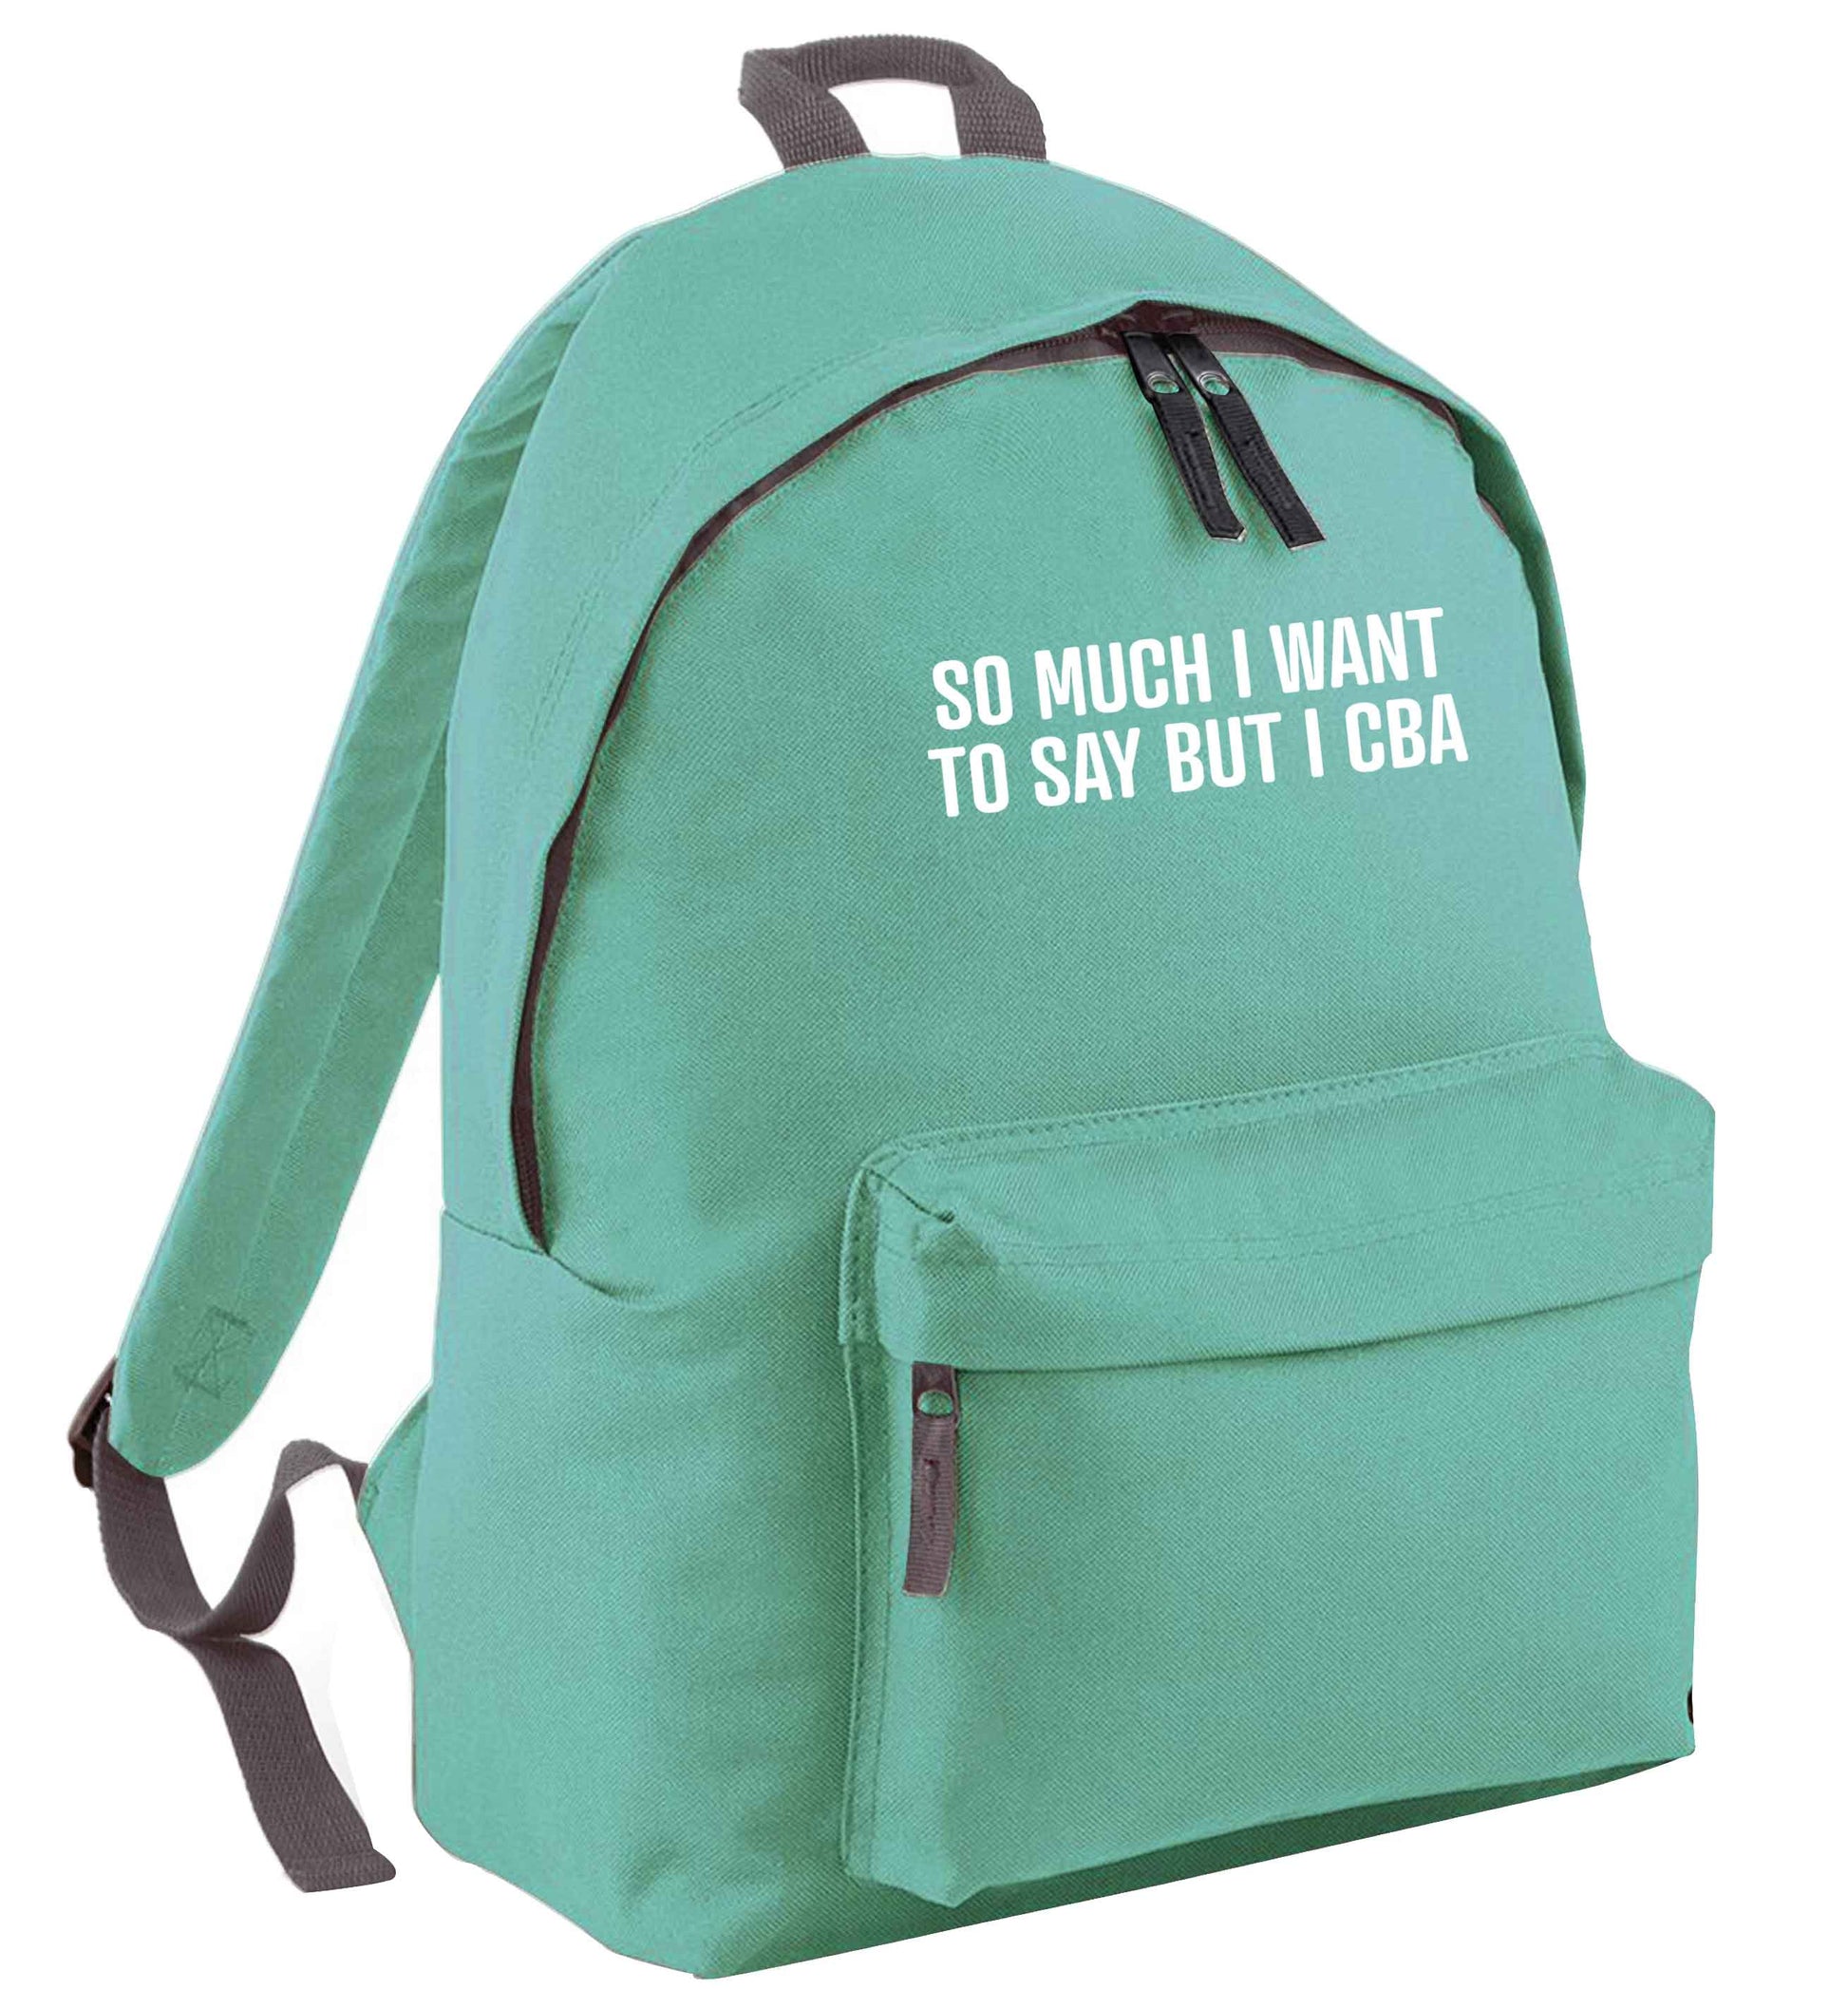 So much I want to say I cba  mint adults backpack